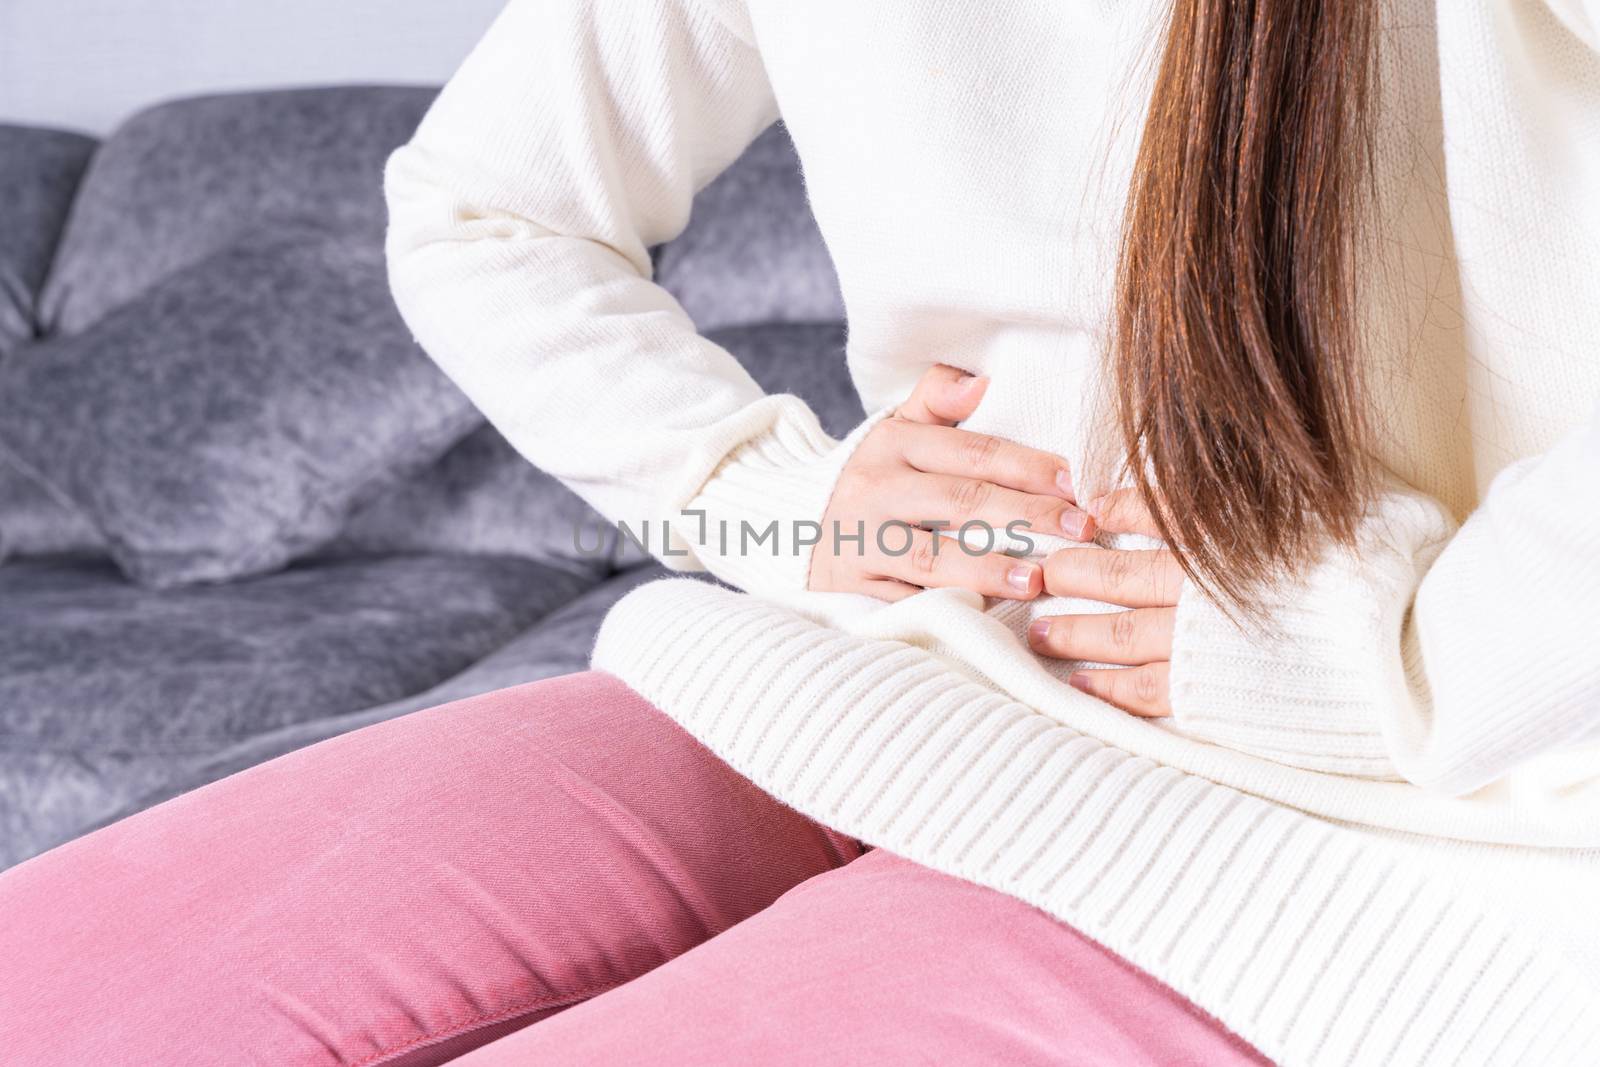 Young woman suffering from strong abdominal pain or menstruation while sitting on sofa at home. Healthcare medical or daily life concept. by mikesaran